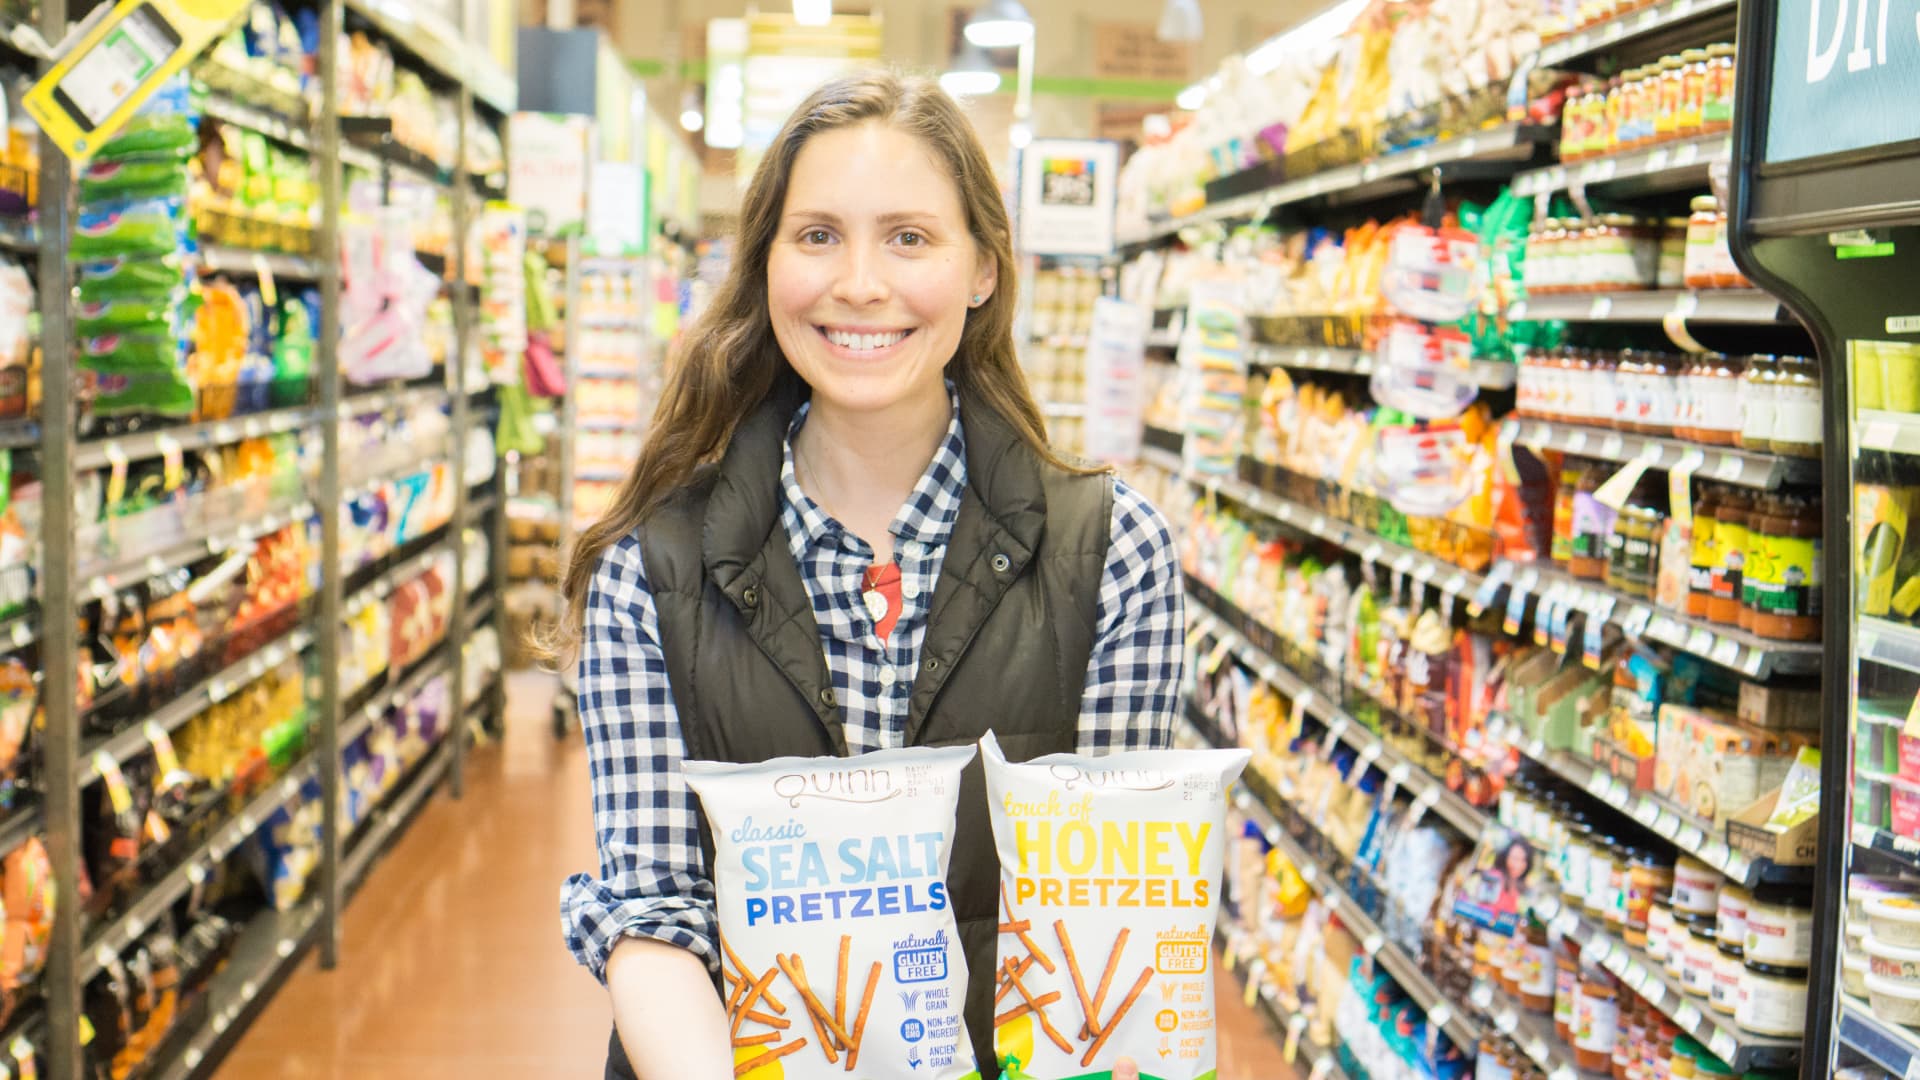 Quinn Snacks founder Kristy Lewis showing off her snacks in a grocery aisle.